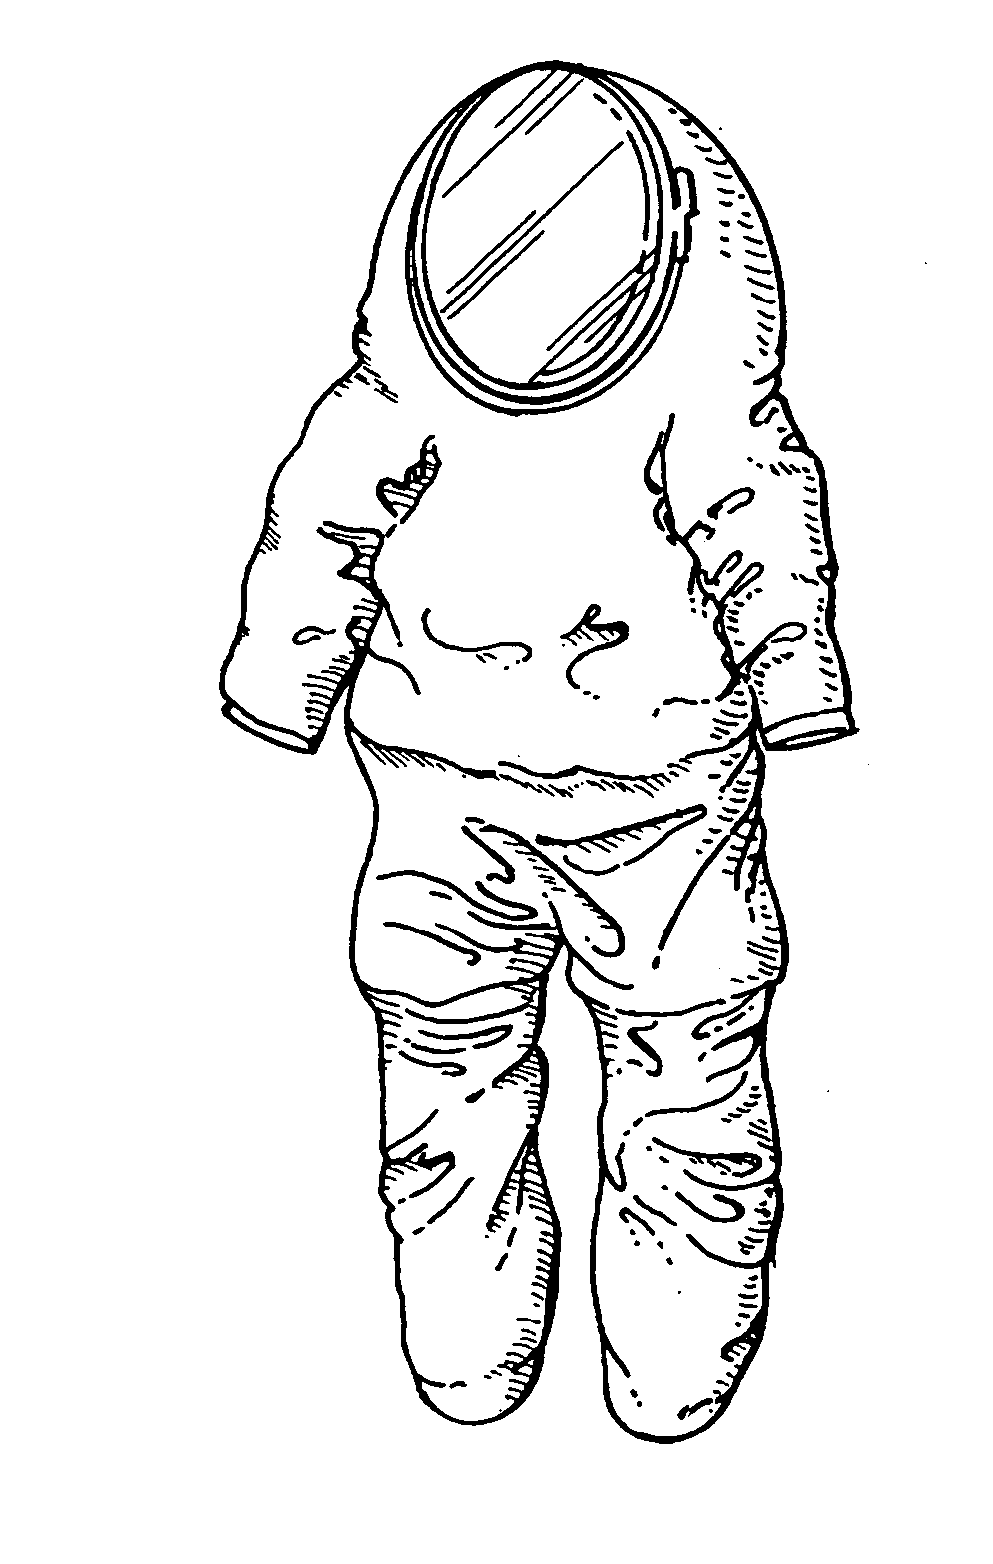 Space suit protective overcover